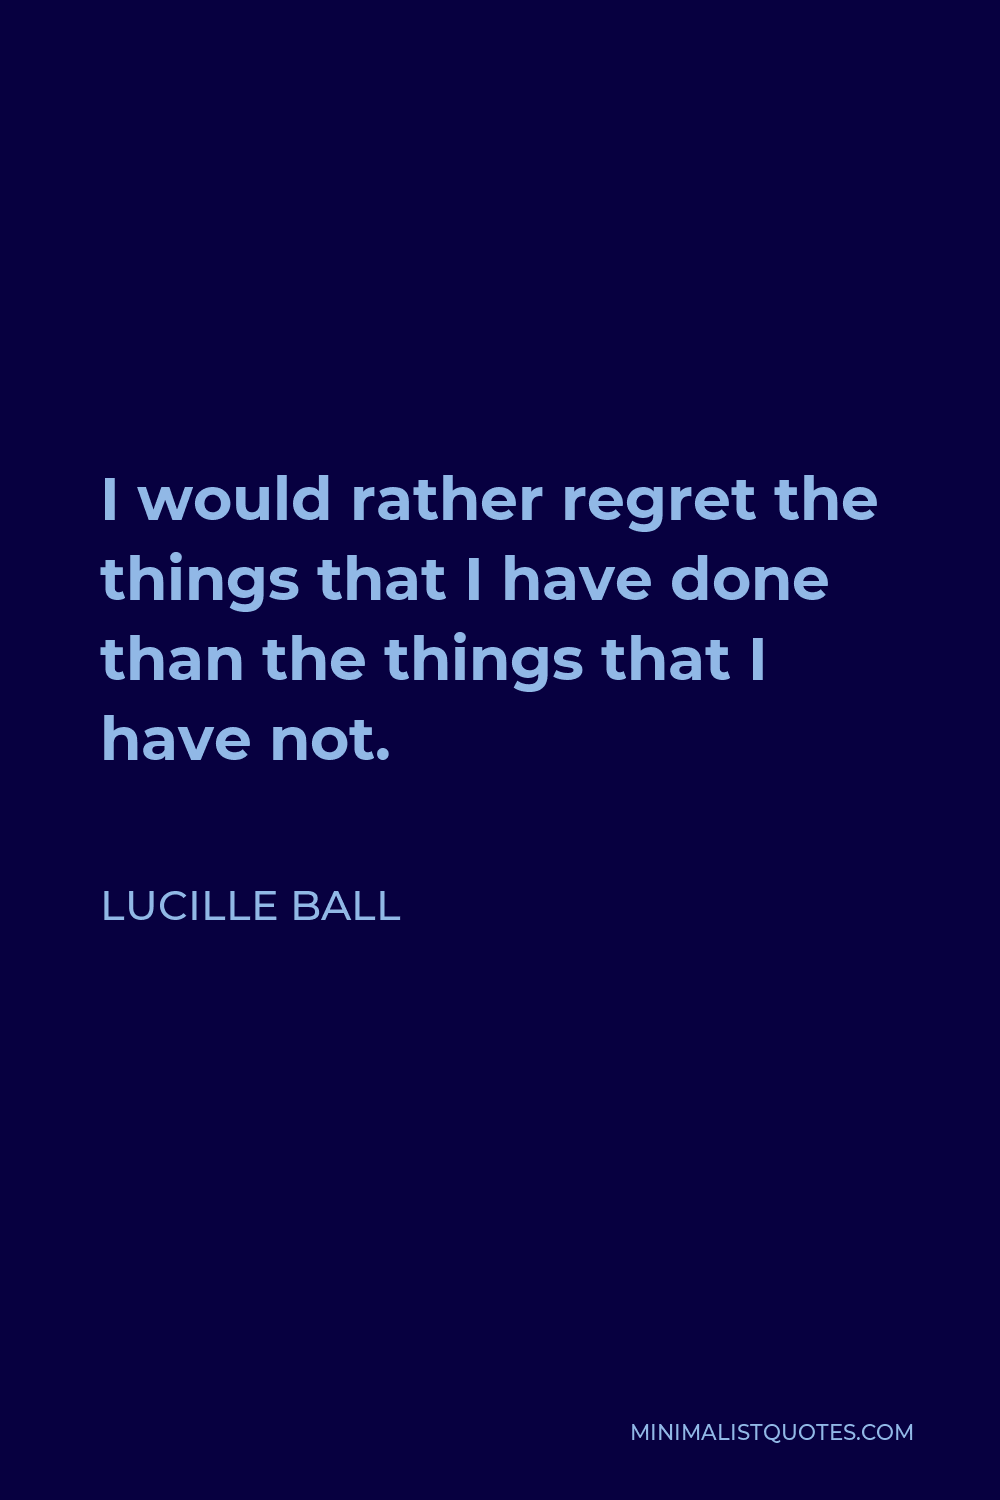 Lucille Ball Quote - I would rather regret the things that I have done than the things that I have not.